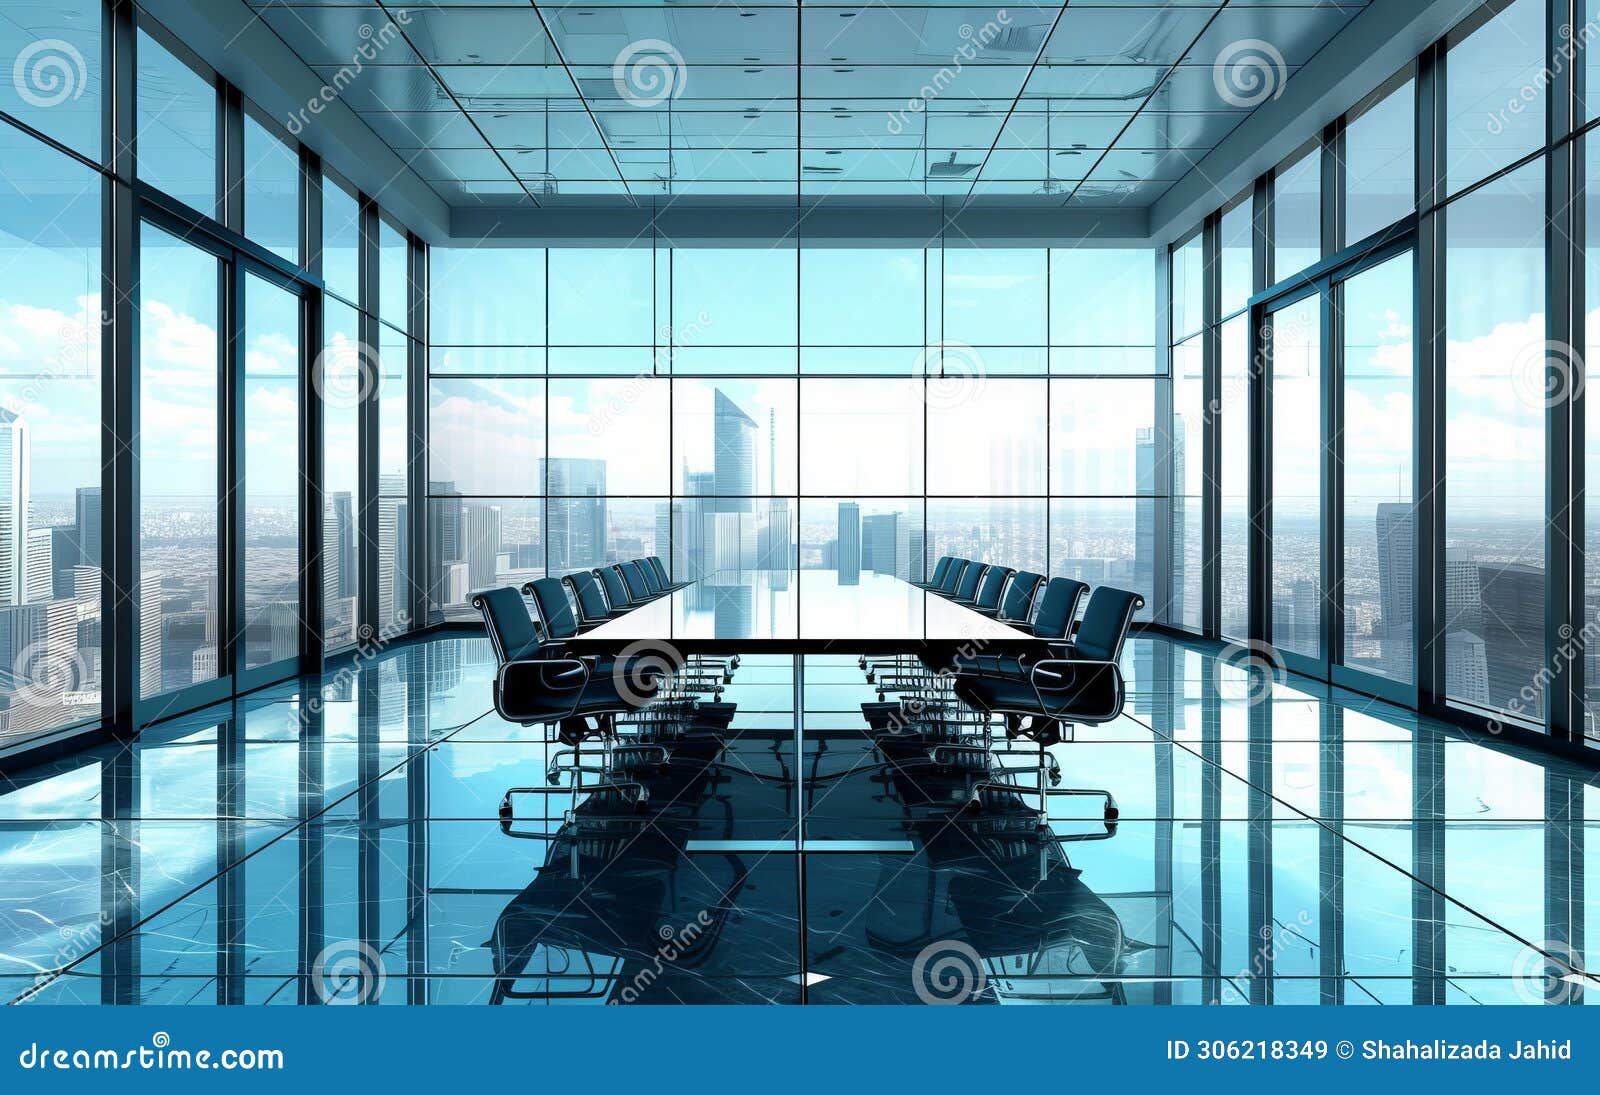 high level meeting of excutive room is decorated with stylish table and chairs around.